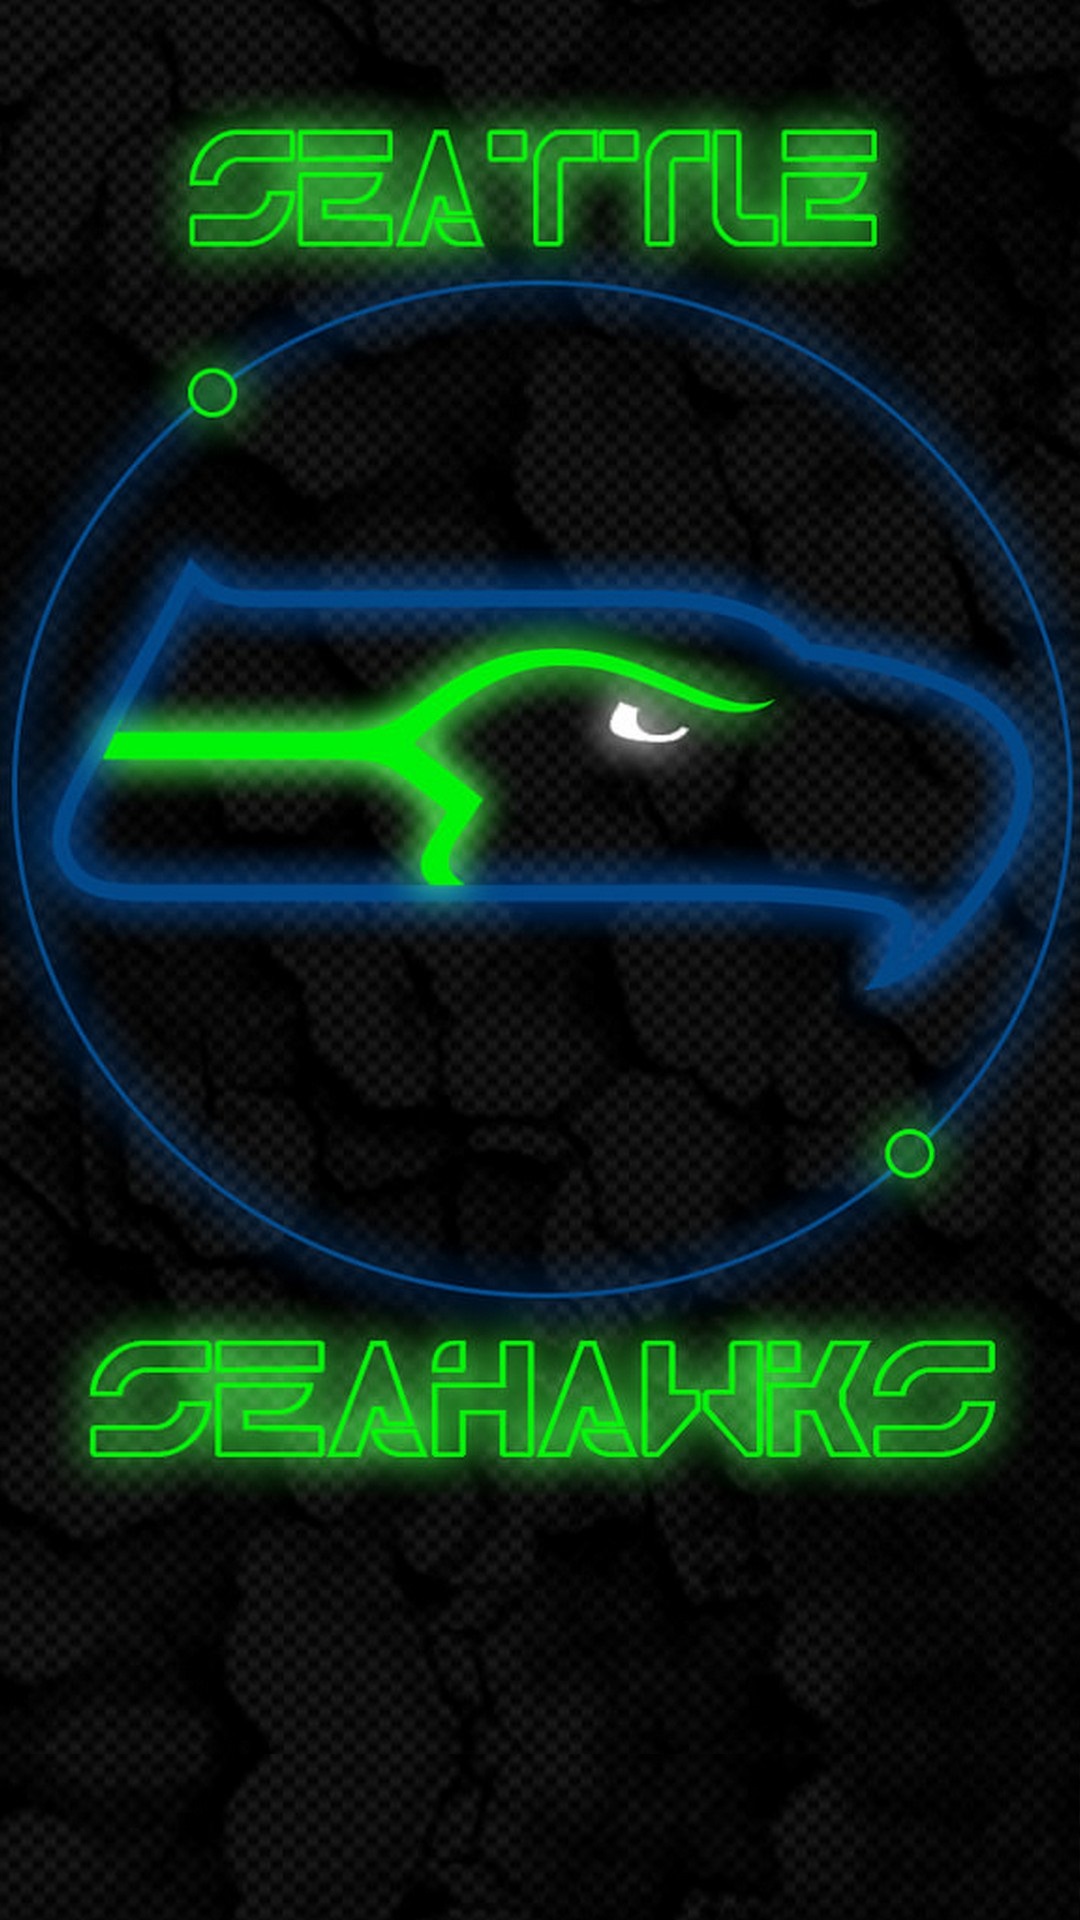 Wallpapers iPhone Seattle Seahawks With high-resolution 1080X1920 pixel. Donwload and set as wallpaper for your iPhone X, iPhone XS home screen backgrounds, XS Max, XR, iPhone8 lock screen wallpaper, iPhone 7, 6, SE, and other mobile devices